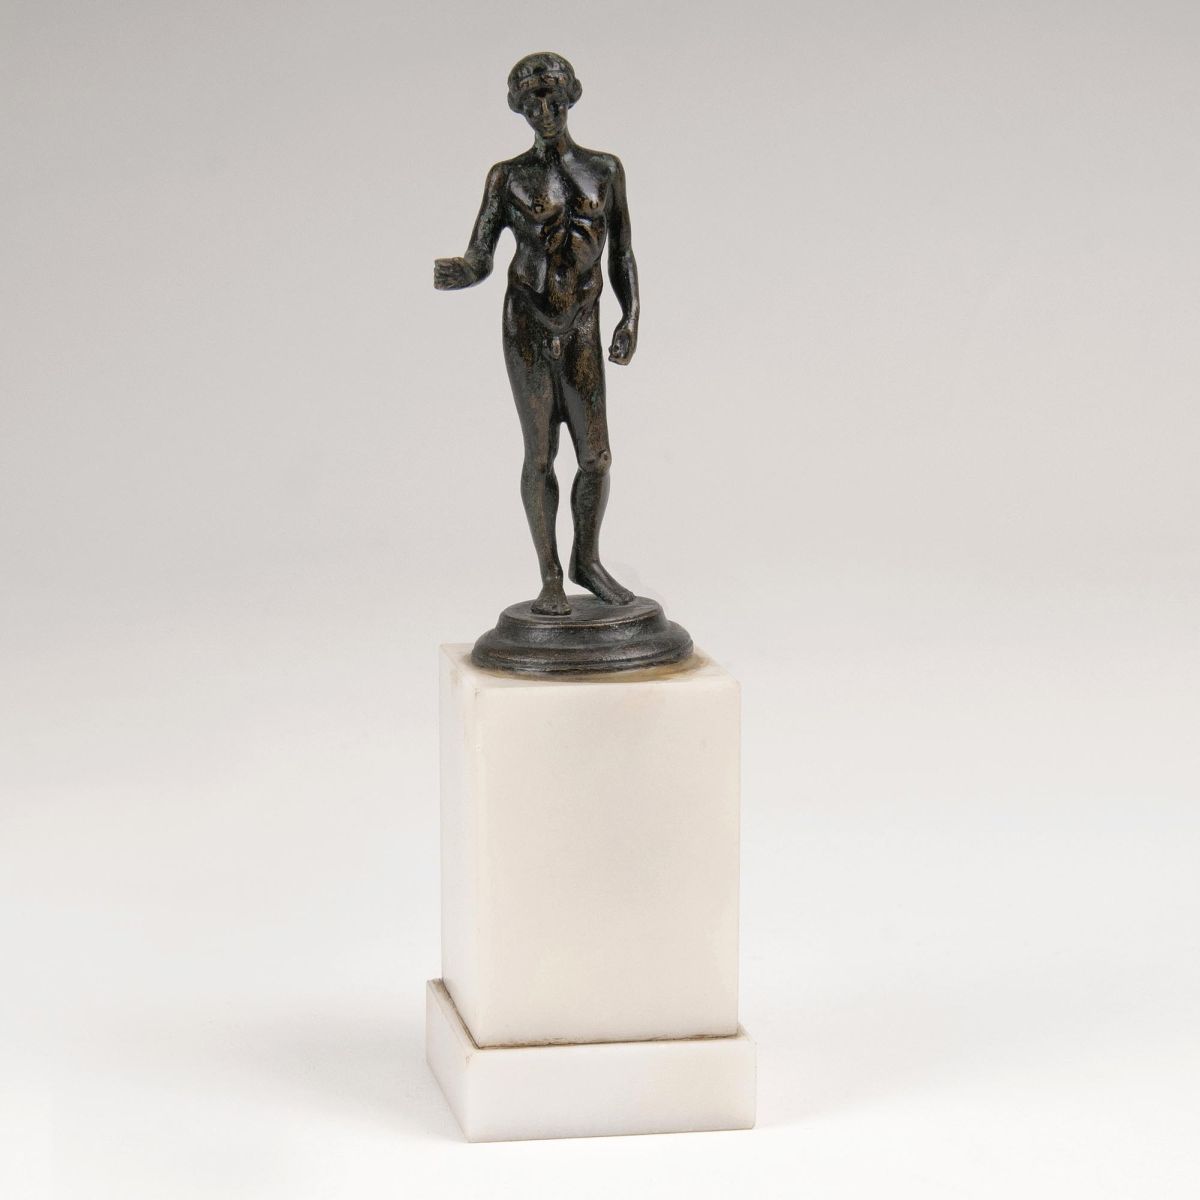 A Small Figure of a Nude Youth